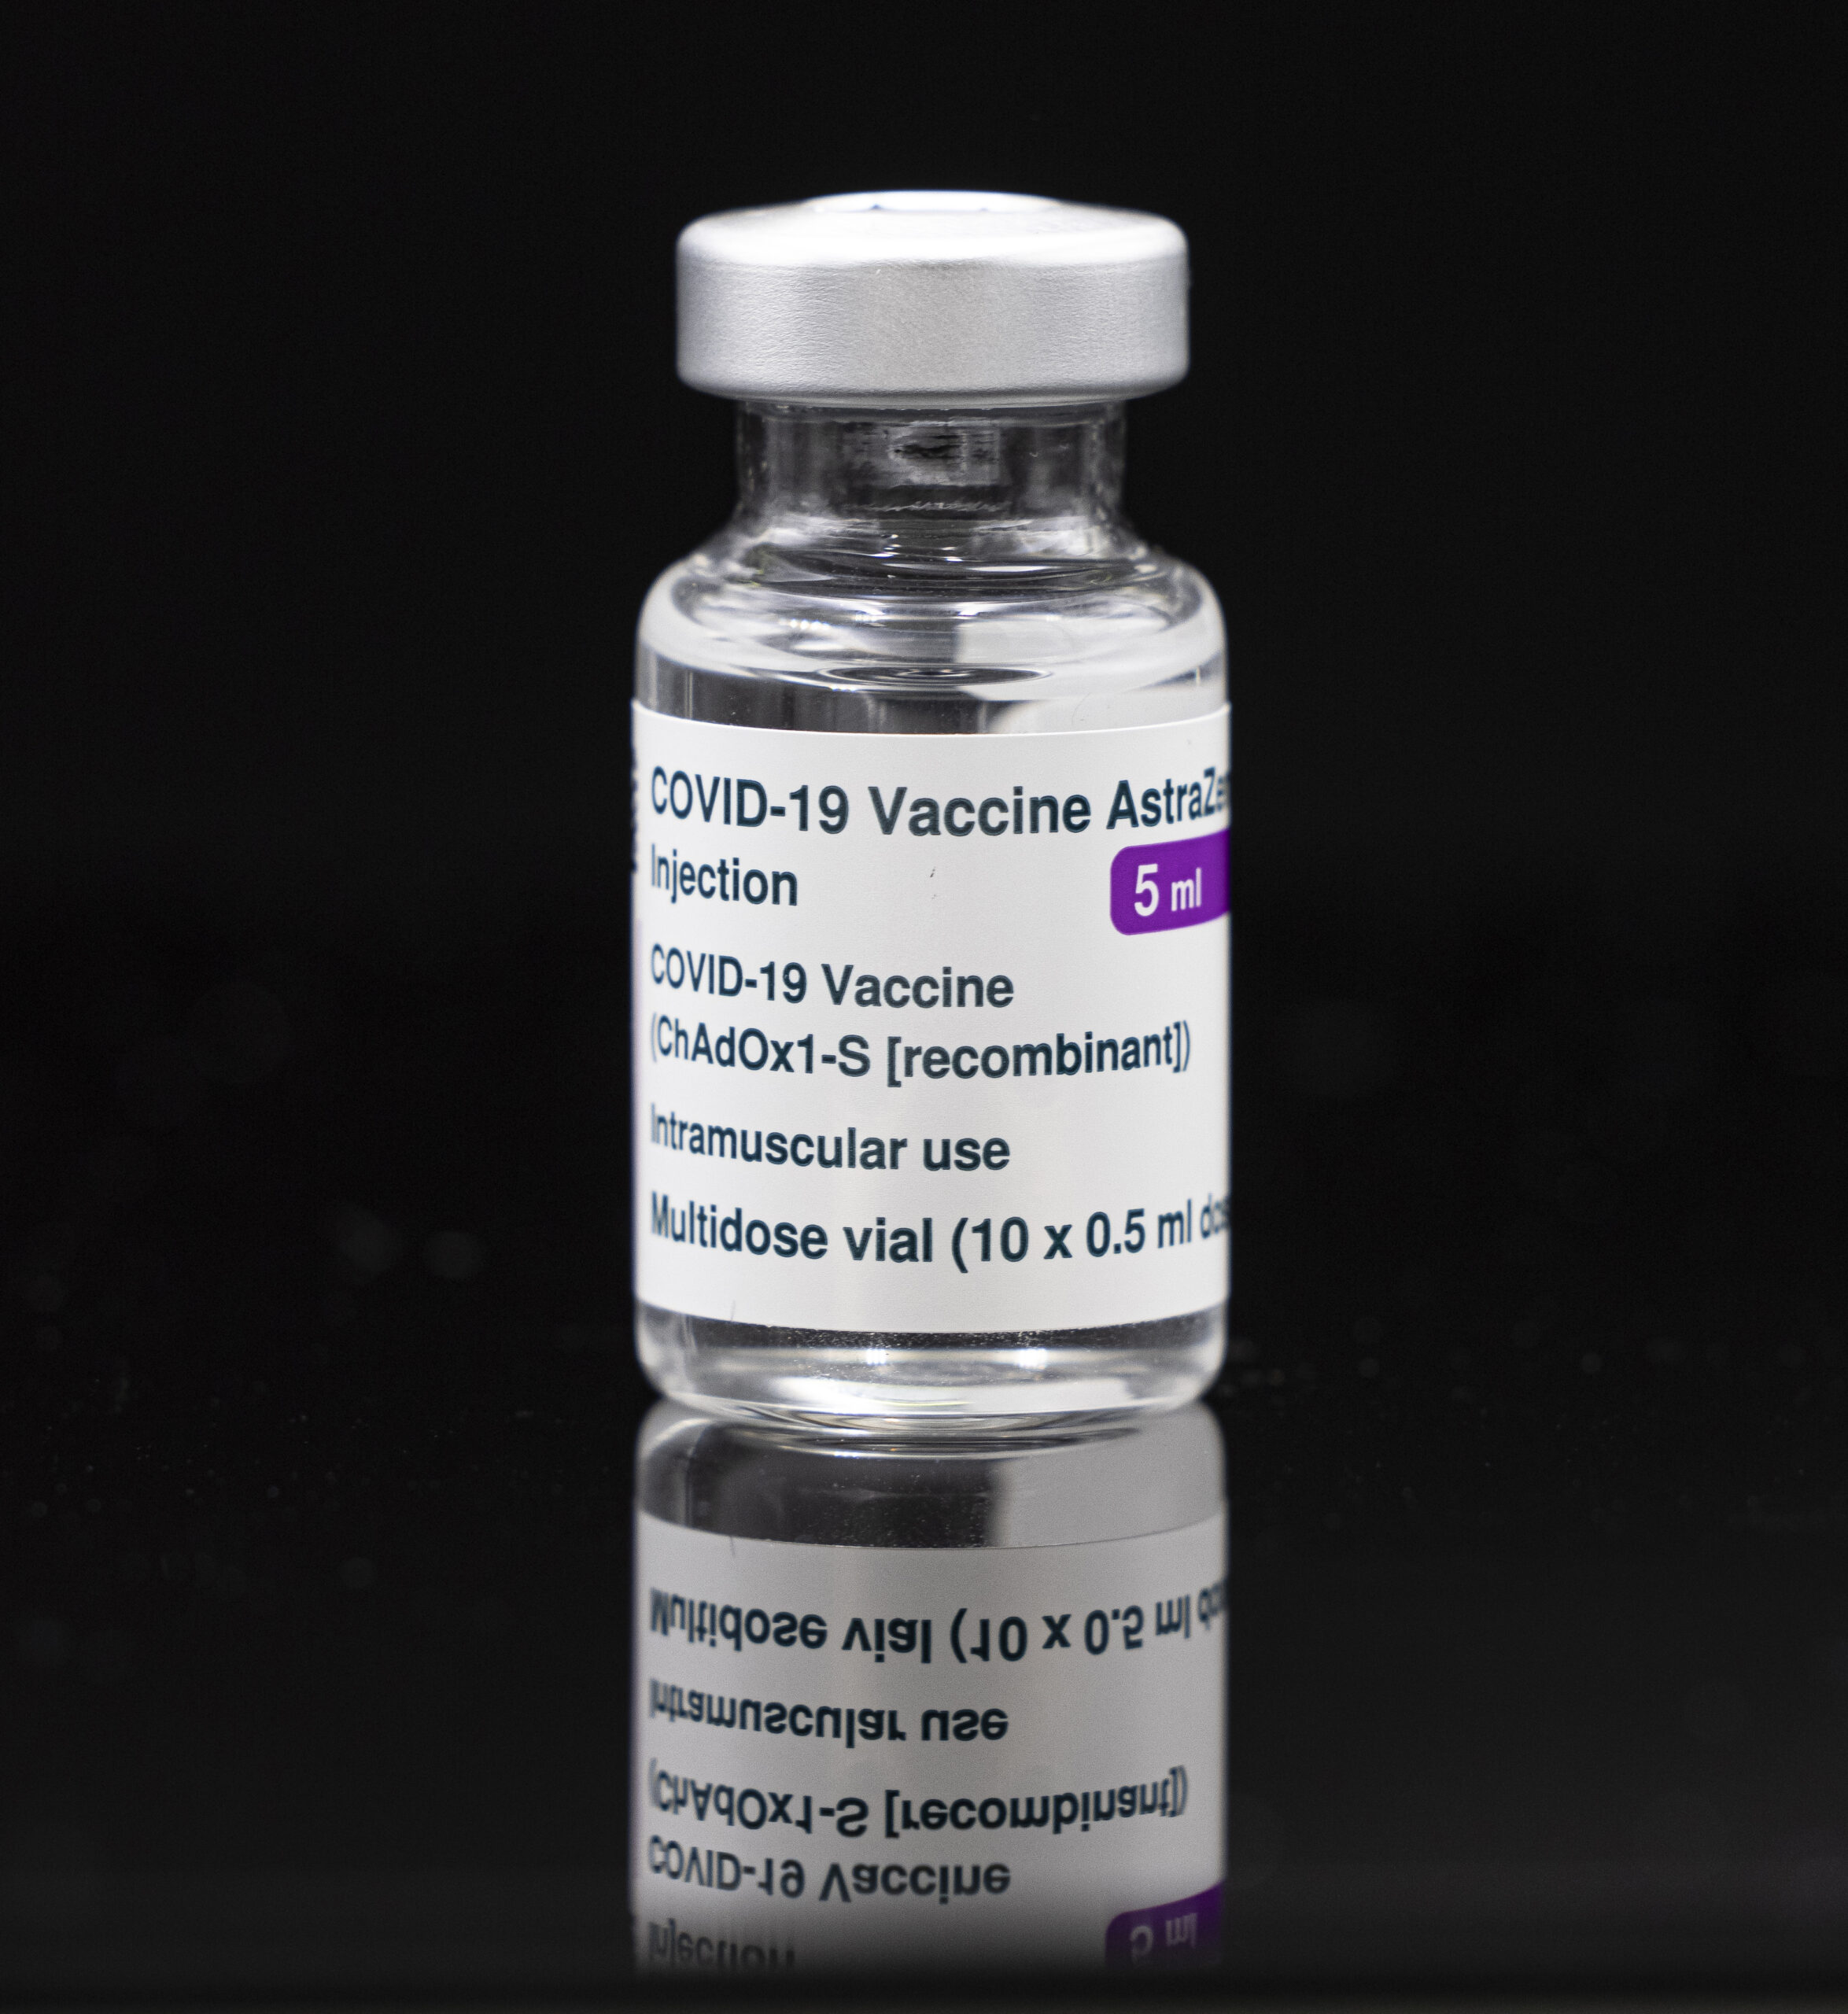 AstraZeneca's Vaccine Withdrawal Saga: Lawsuits, Allegations, and the Aftermath